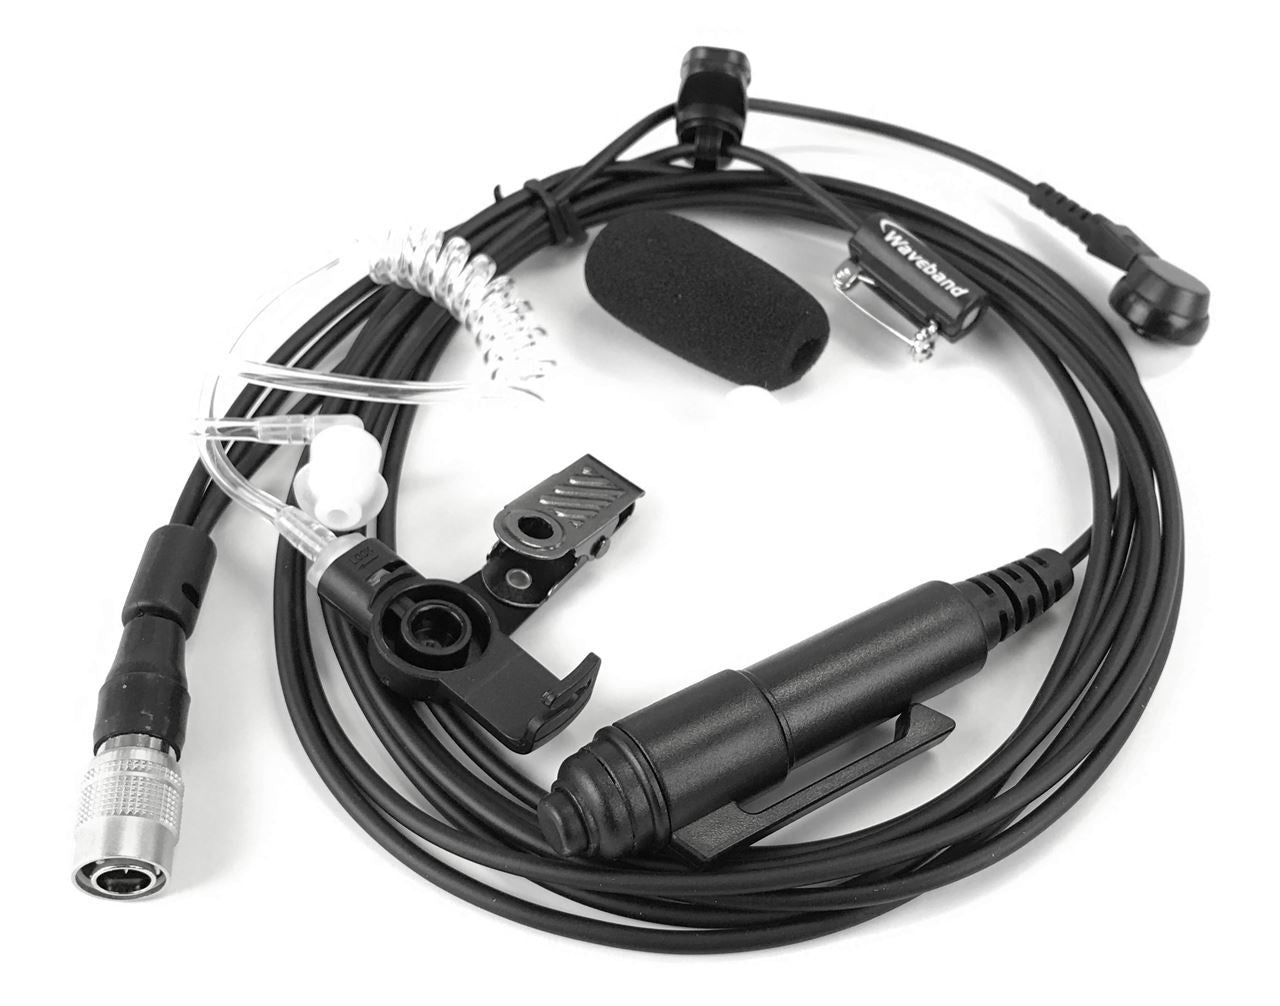 Comparable KHS-12 3 wire mini lapel mic with earphone for use with the Kenwood NX-411 Portable Radio - Waveband Communications